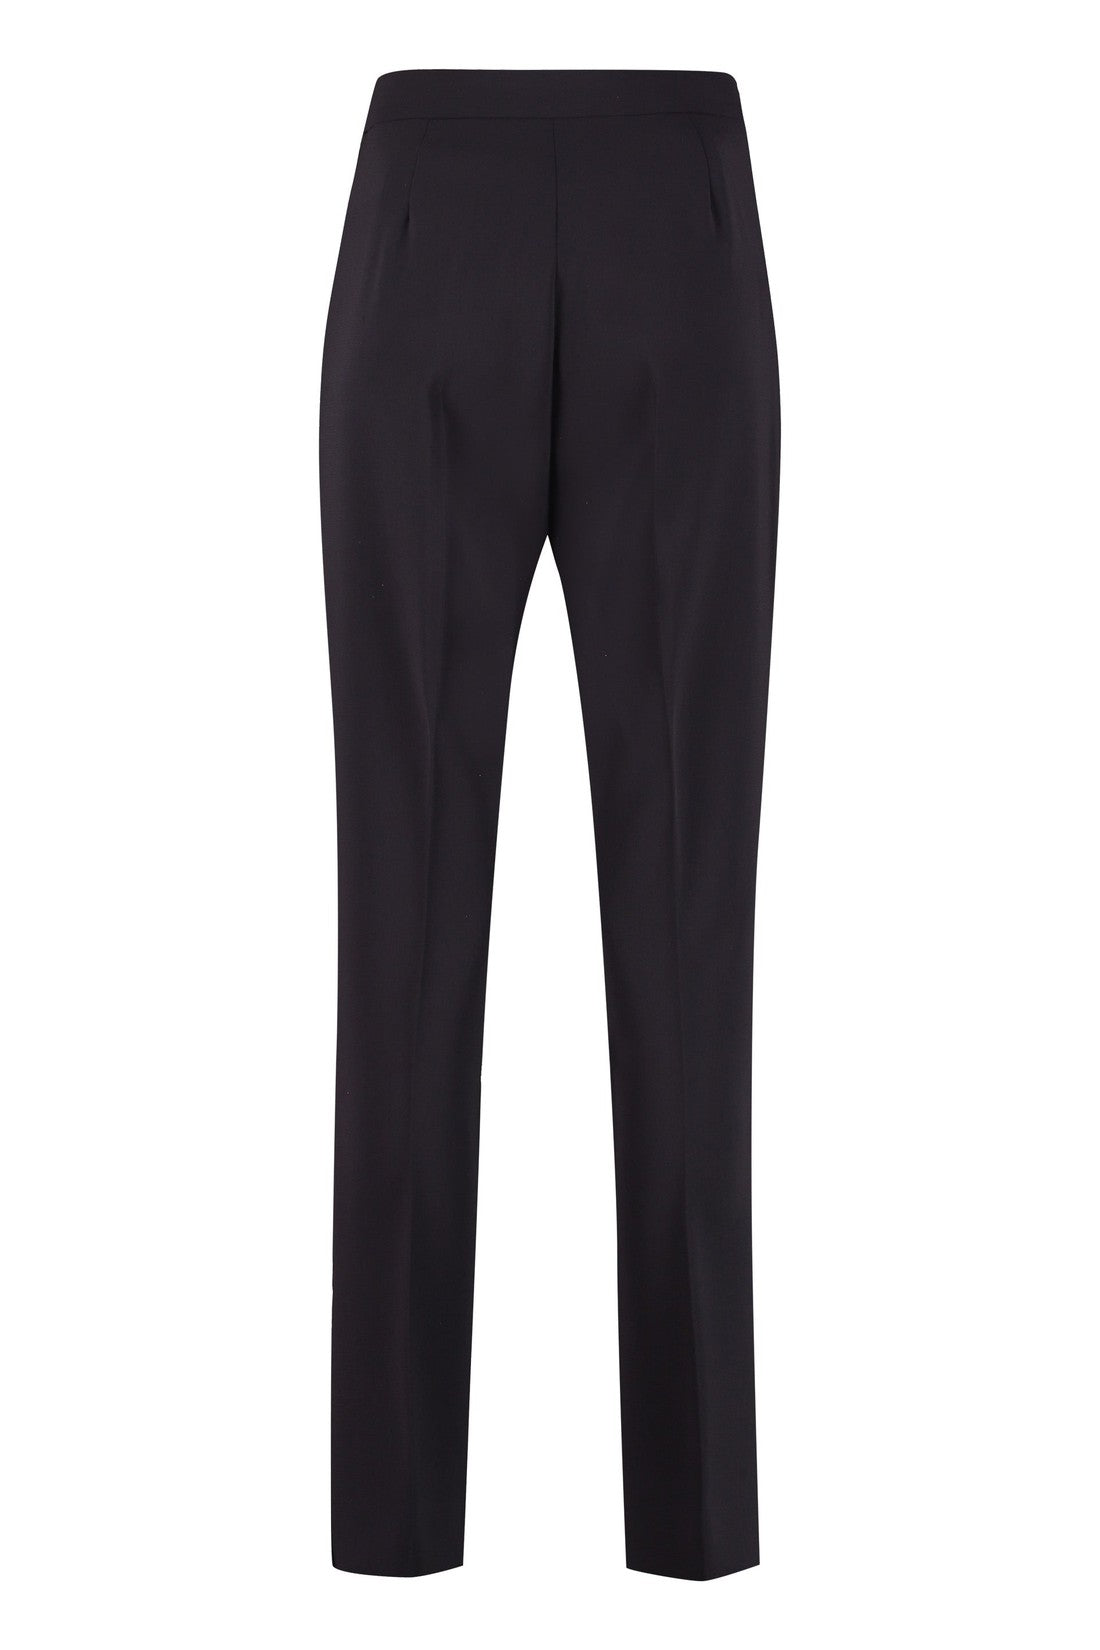 Max Mara-OUTLET-SALE-Anny tailored trousers-ARCHIVIST